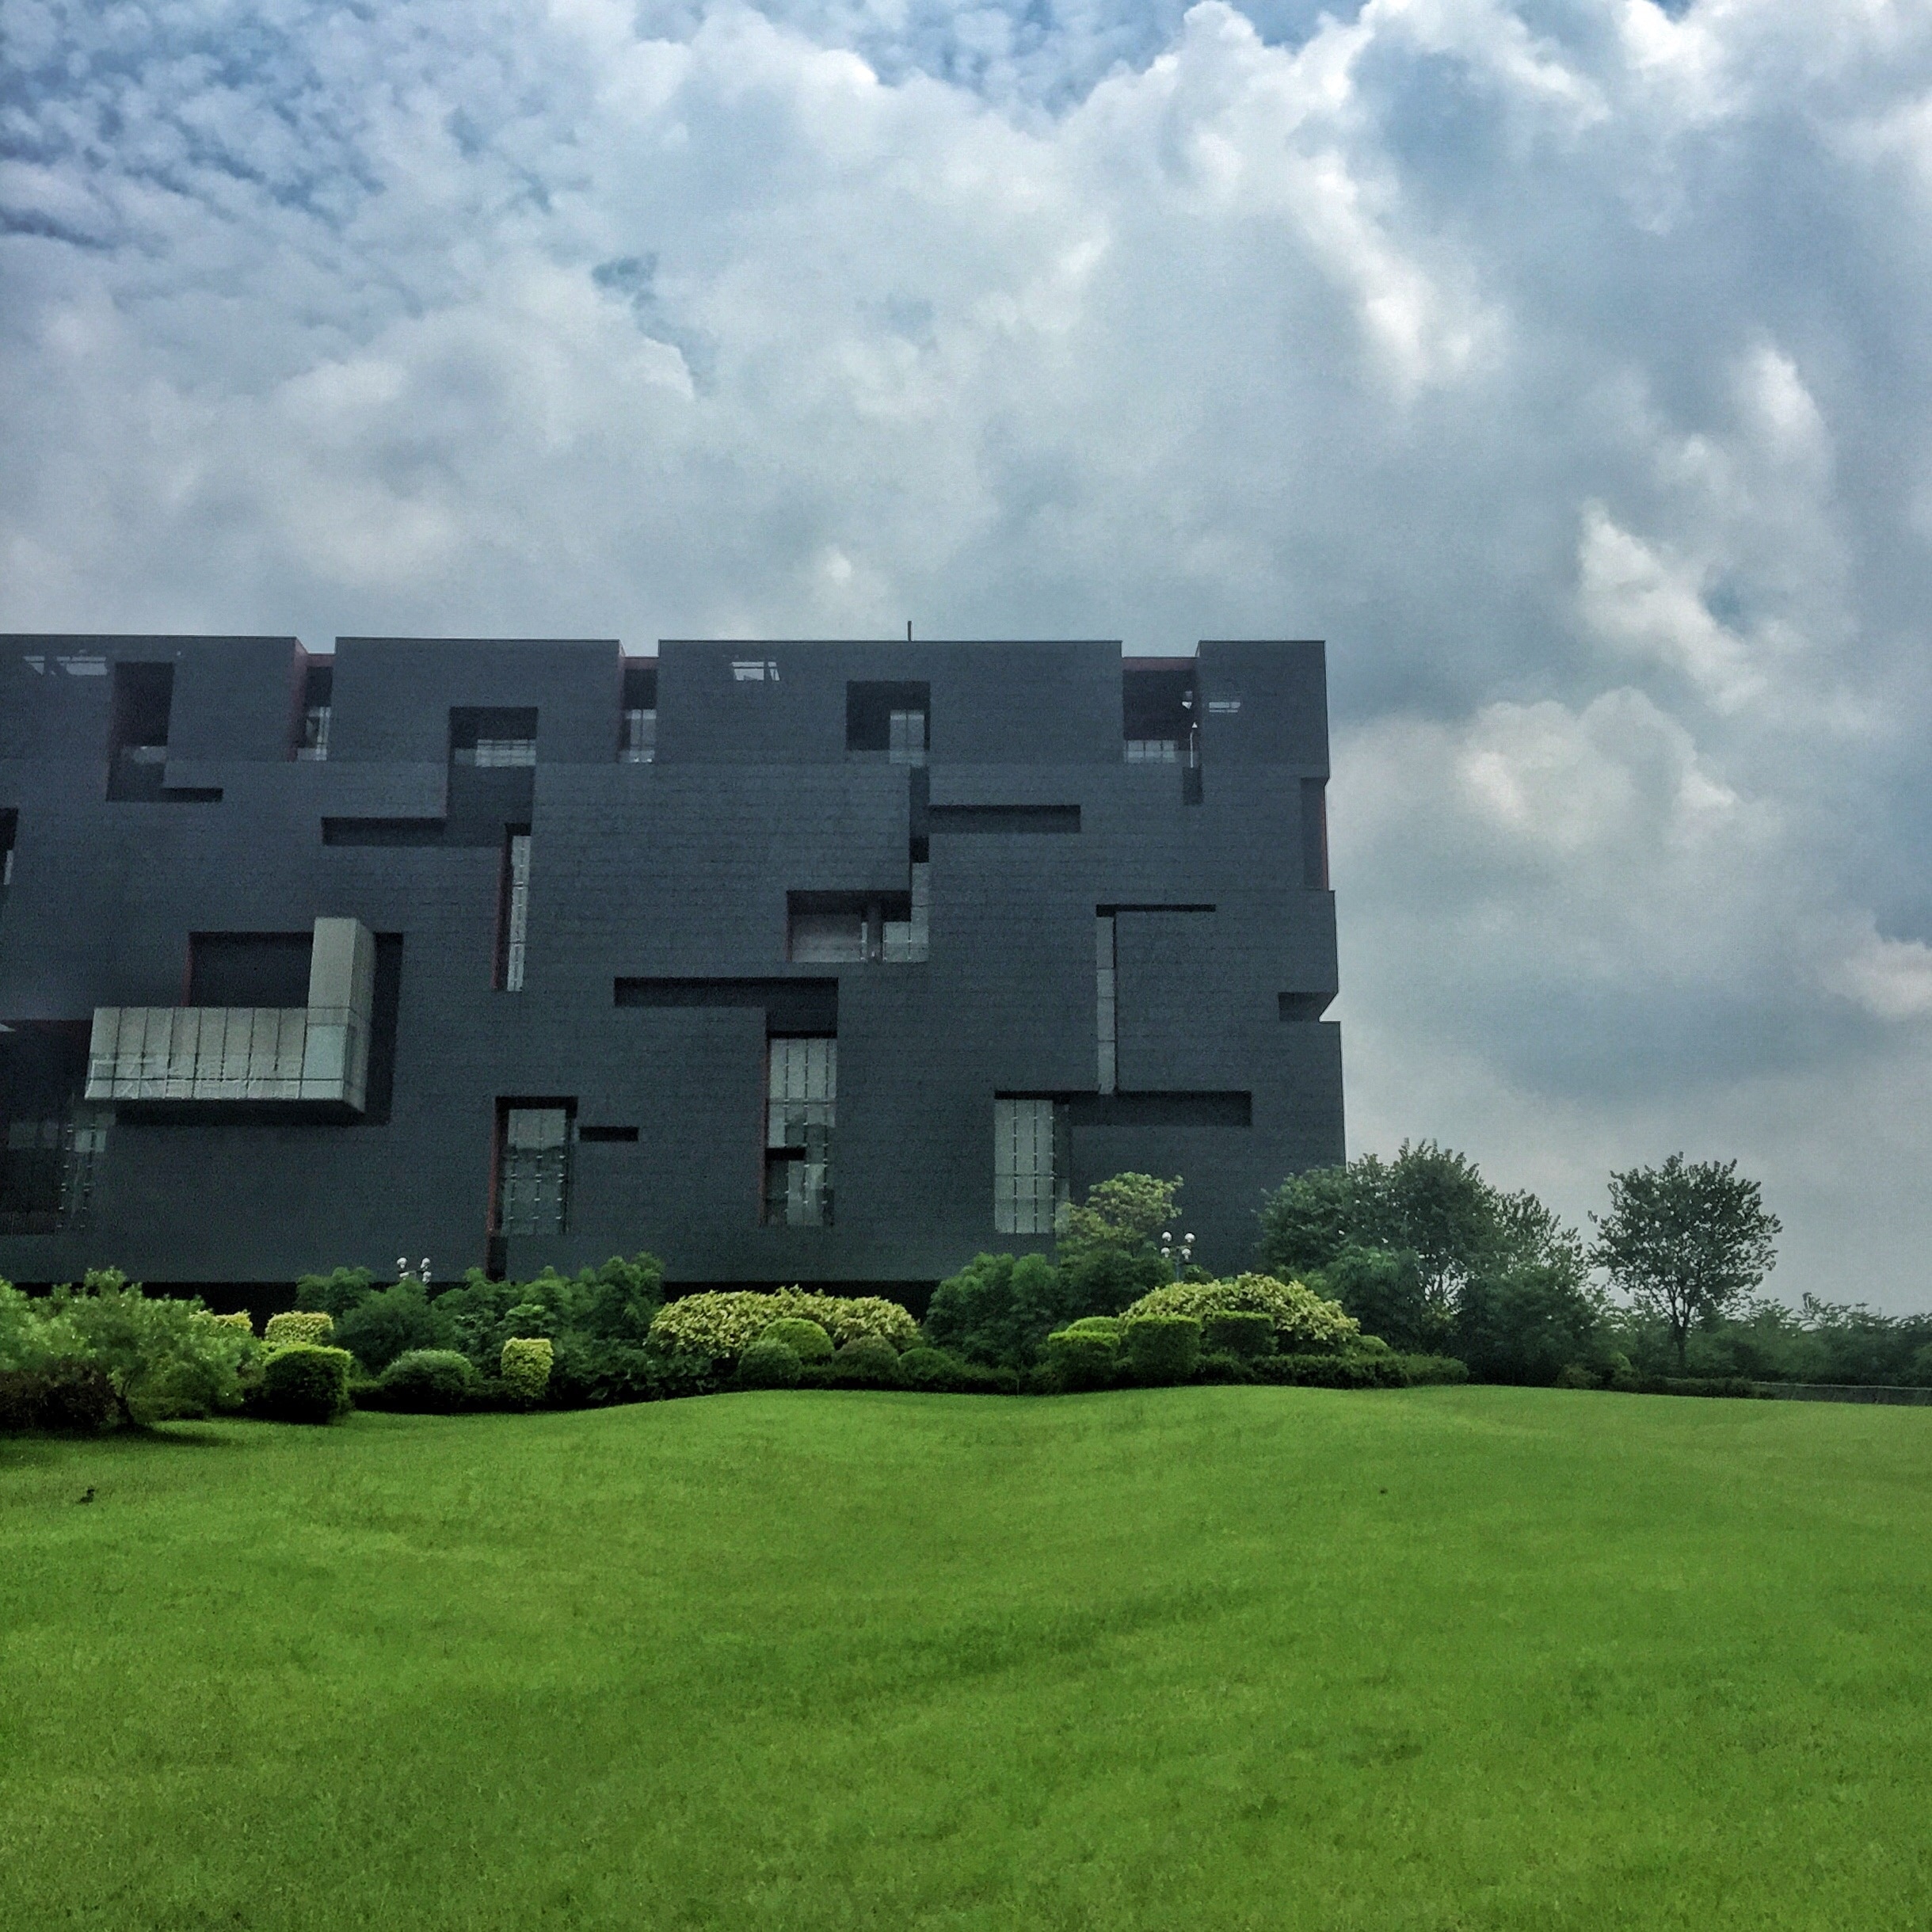 New Guangdong Museum, surrounded by landmarks, nearby Pearl River, is a good place to visit.